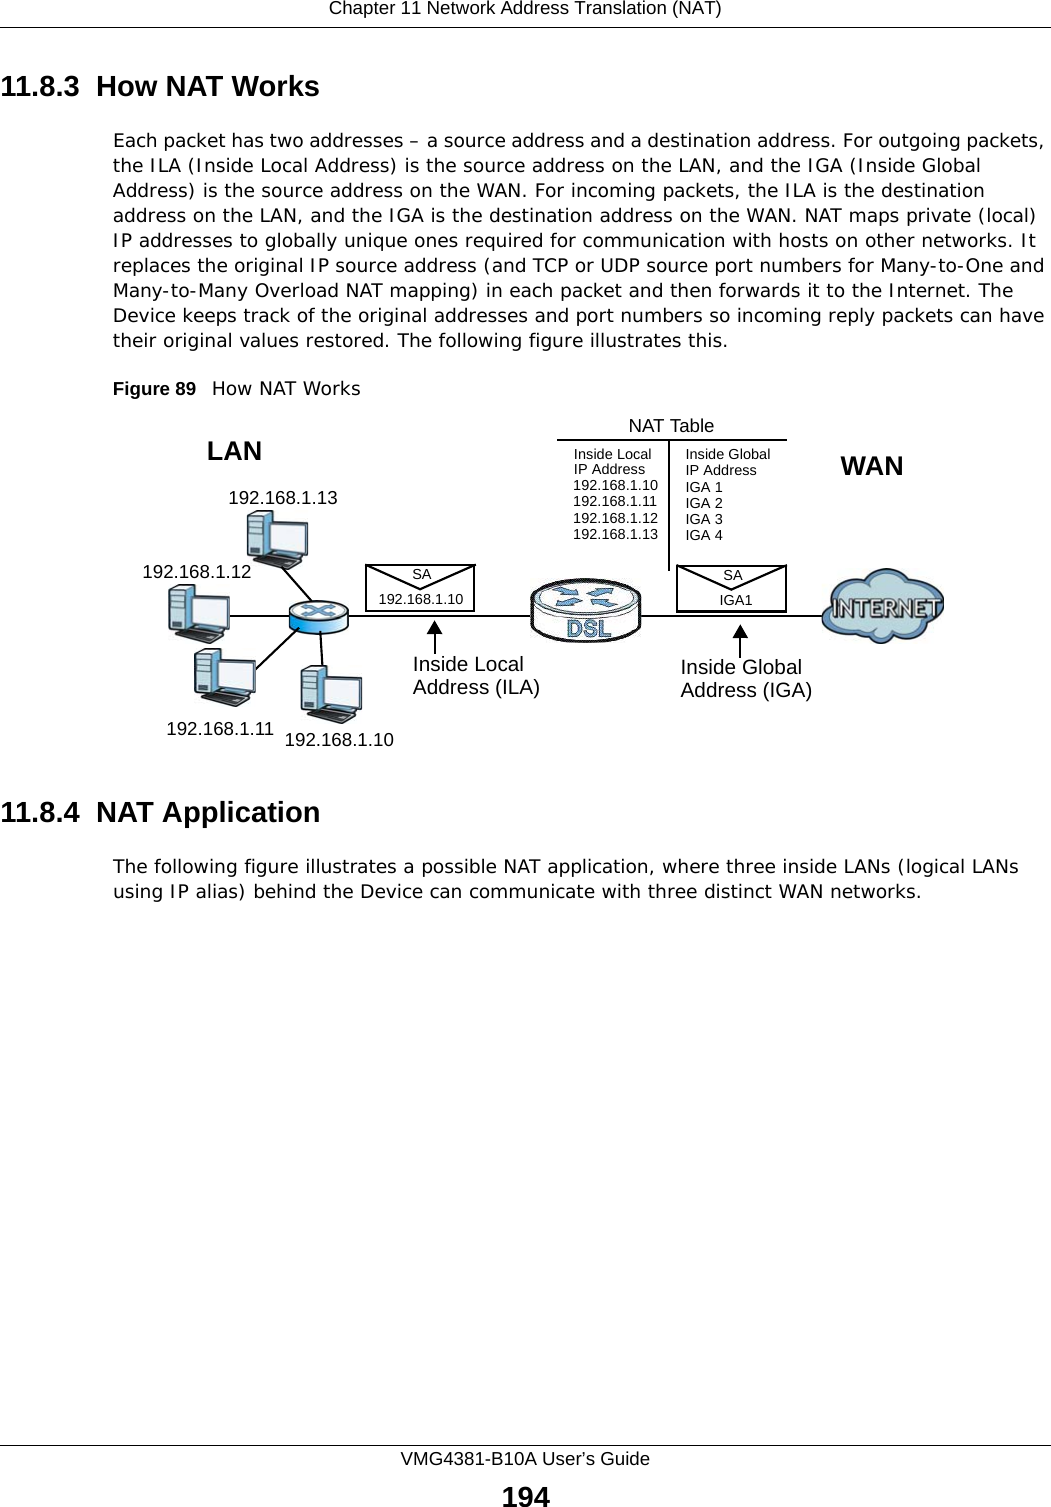 Chapter 11 Network Address Translation (NAT)VMG4381-B10A User’s Guide19411.8.3  How NAT WorksEach packet has two addresses – a source address and a destination address. For outgoing packets, the ILA (Inside Local Address) is the source address on the LAN, and the IGA (Inside Global Address) is the source address on the WAN. For incoming packets, the ILA is the destination address on the LAN, and the IGA is the destination address on the WAN. NAT maps private (local) IP addresses to globally unique ones required for communication with hosts on other networks. It replaces the original IP source address (and TCP or UDP source port numbers for Many-to-One and Many-to-Many Overload NAT mapping) in each packet and then forwards it to the Internet. The Device keeps track of the original addresses and port numbers so incoming reply packets can have their original values restored. The following figure illustrates this.Figure 89   How NAT Works11.8.4  NAT ApplicationThe following figure illustrates a possible NAT application, where three inside LANs (logical LANs using IP alias) behind the Device can communicate with three distinct WAN networks.192.168.1.13192.168.1.10192.168.1.11192.168.1.12 SA192.168.1.10SAIGA1Inside LocalIP Address192.168.1.10192.168.1.11192.168.1.12192.168.1.13Inside Global IP AddressIGA 1IGA 2IGA 3IGA 4NAT TableWANLANInside LocalAddress (ILA) Inside GlobalAddress (IGA)